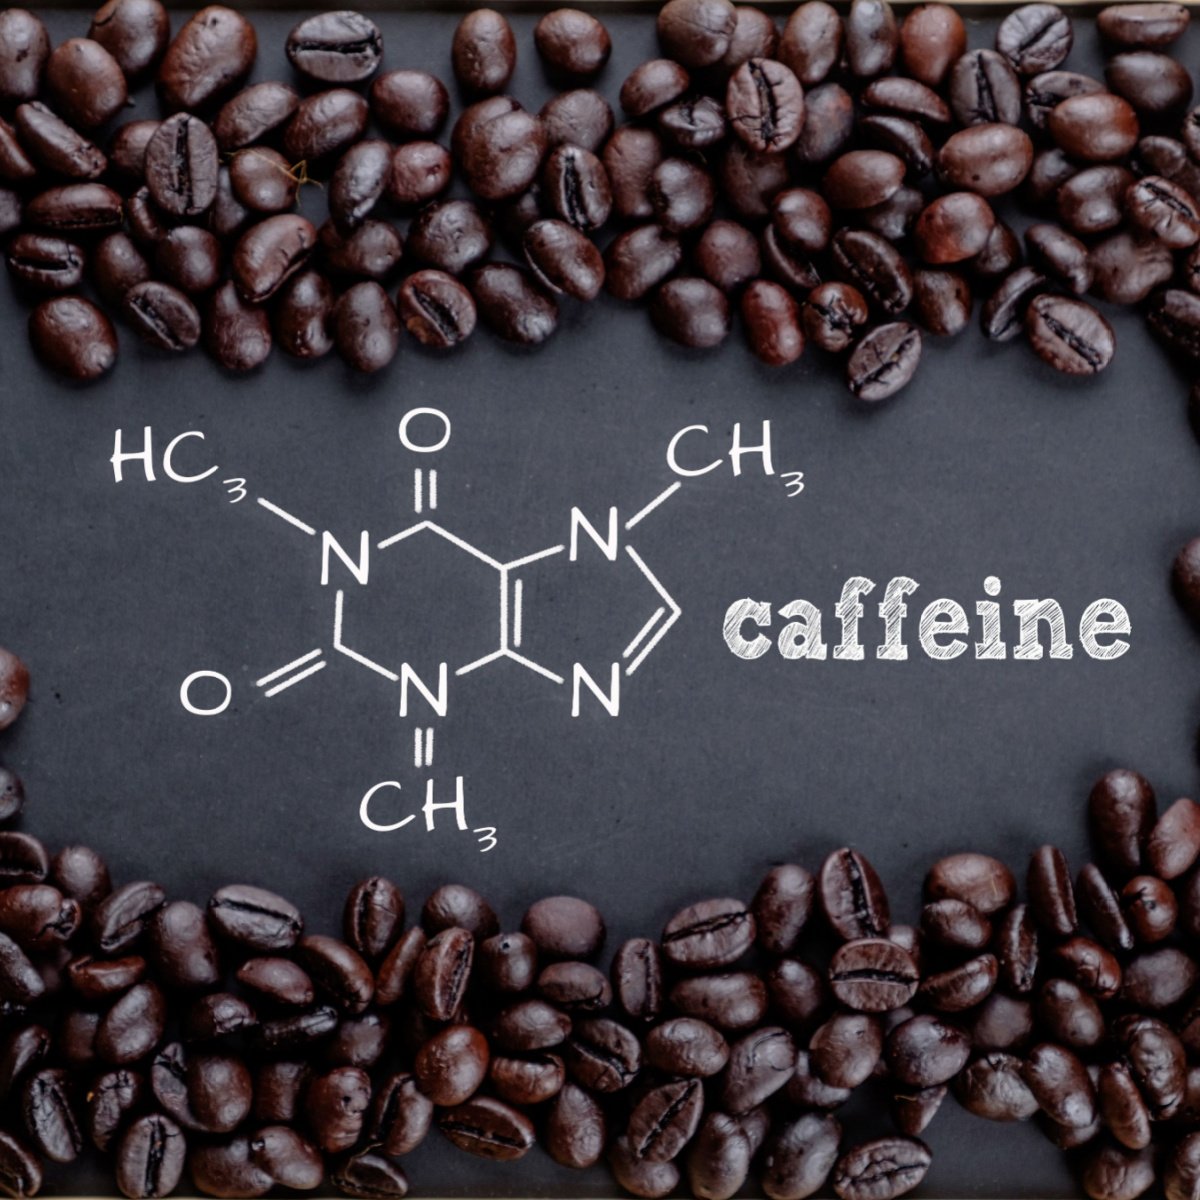 caffeine word and chemical structure written on blackboard surrounded by coffee beans